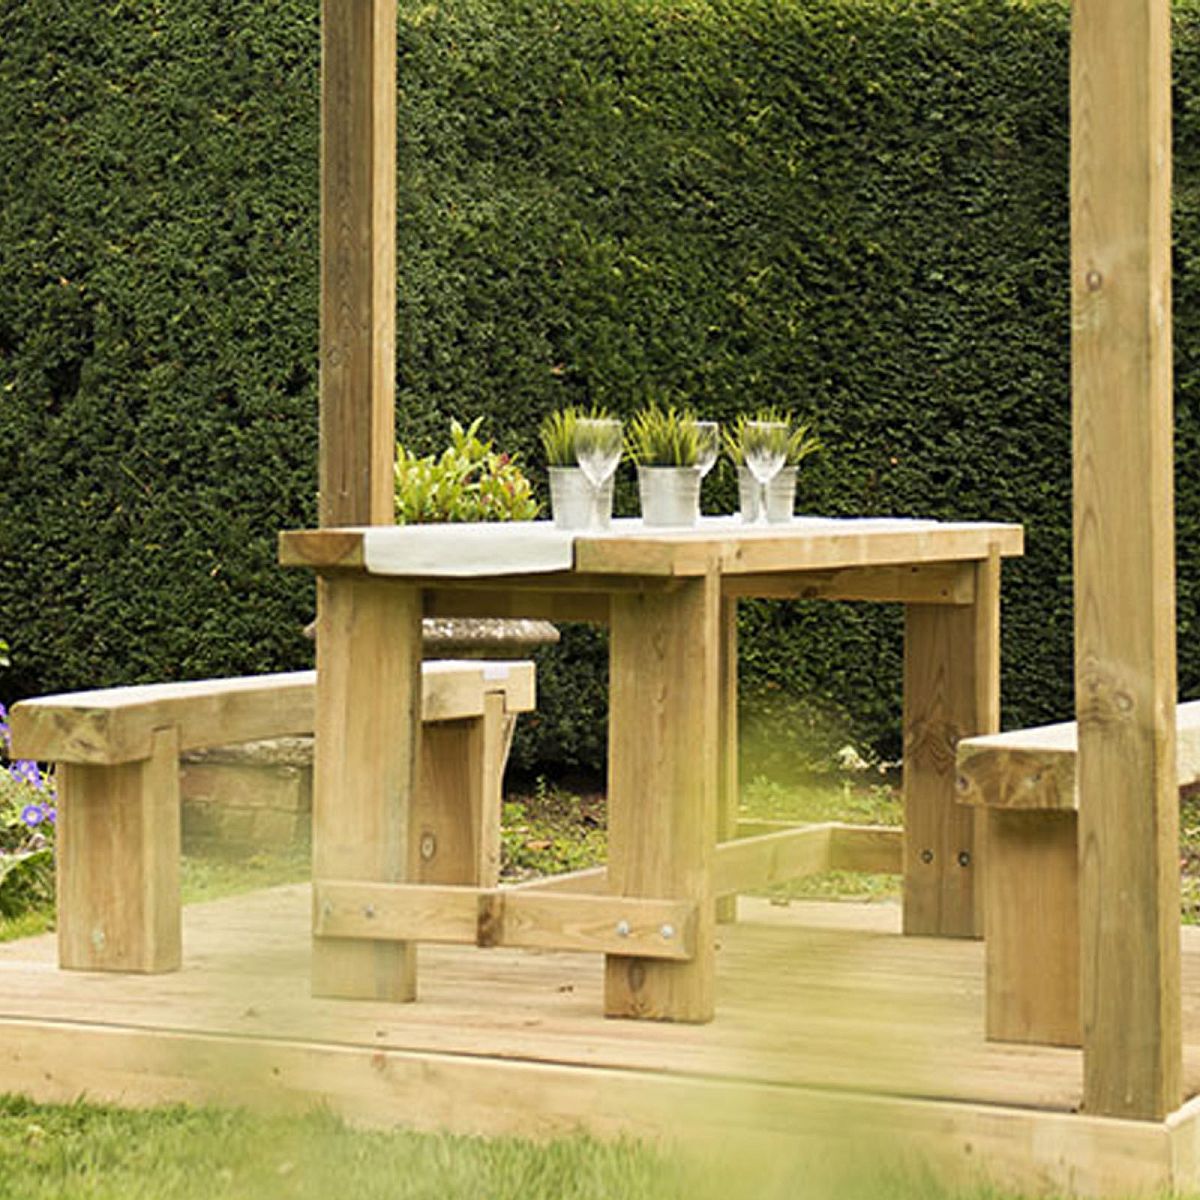 Outdoor Wooden Refectory Table by Forest Garden